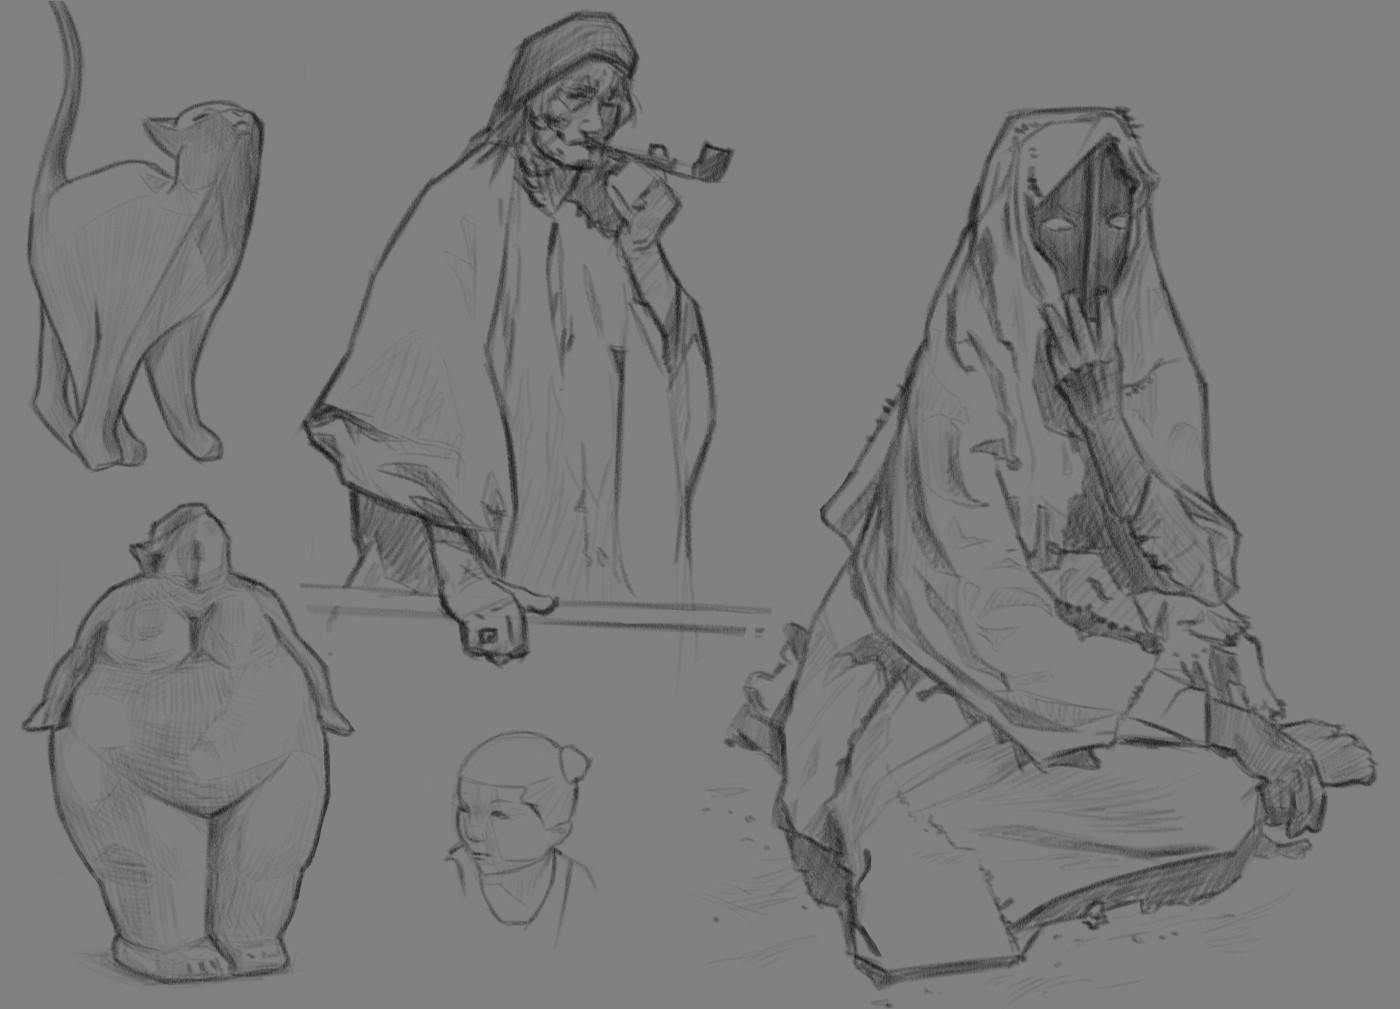 A digital sketch emulating graphite of several subjects; a statue of a cat, a fertility statue, a young girl's face, a bedouin man smoking a pipe and wearing a cloak, and a cloaked man holding a mask to his face sitting on the ground.